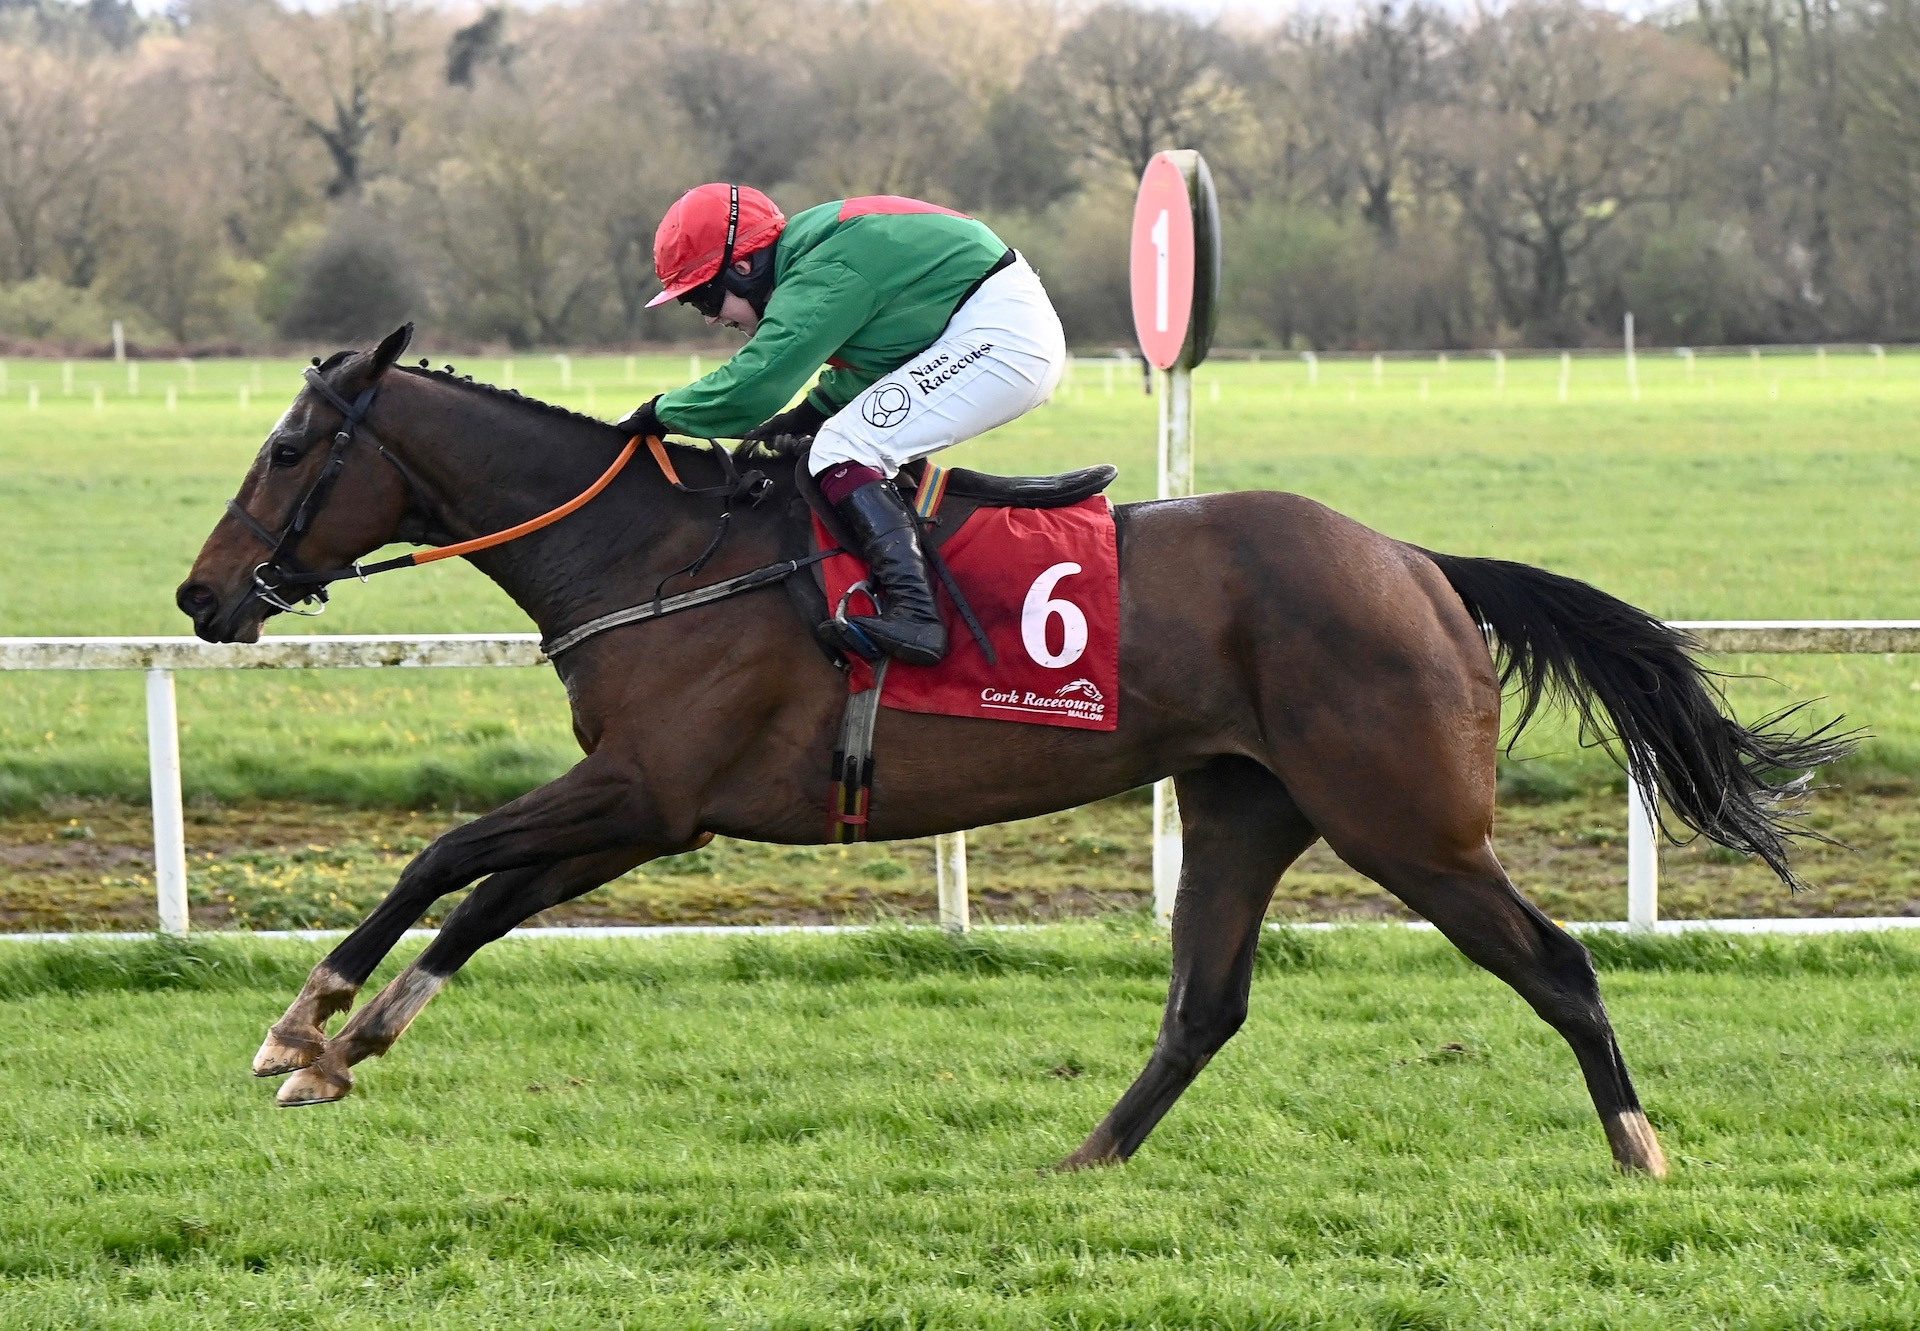 Straight Home (Yeats) Wins The Mares Point Flat Race At Cork